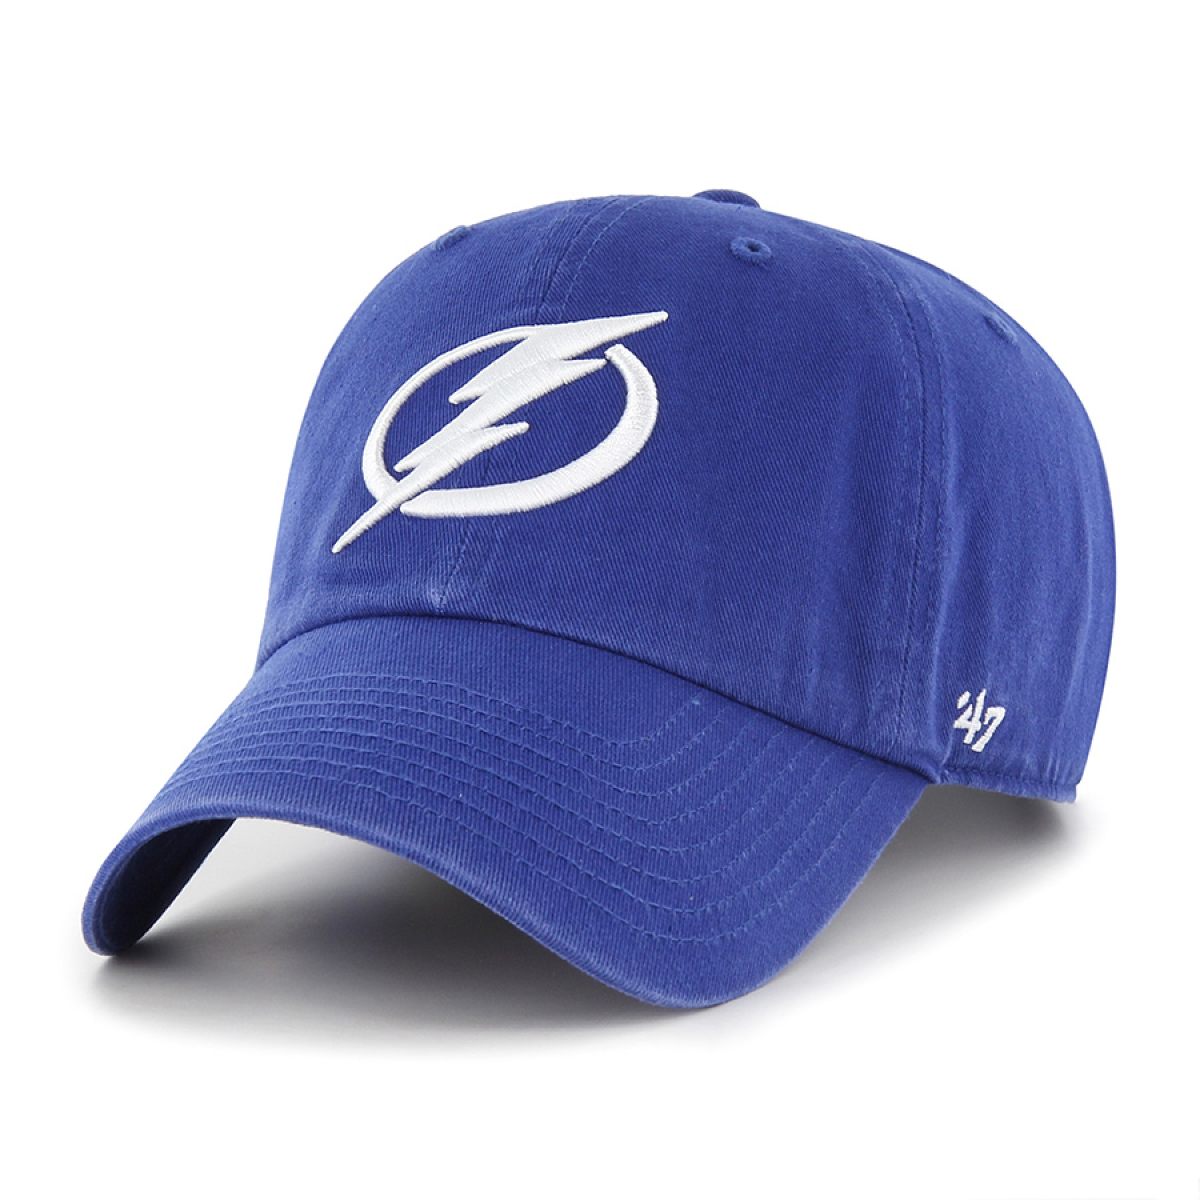 Tampa Bay Lightning '47 Adjustable Blue Clean Up Hat with American Flag Patch